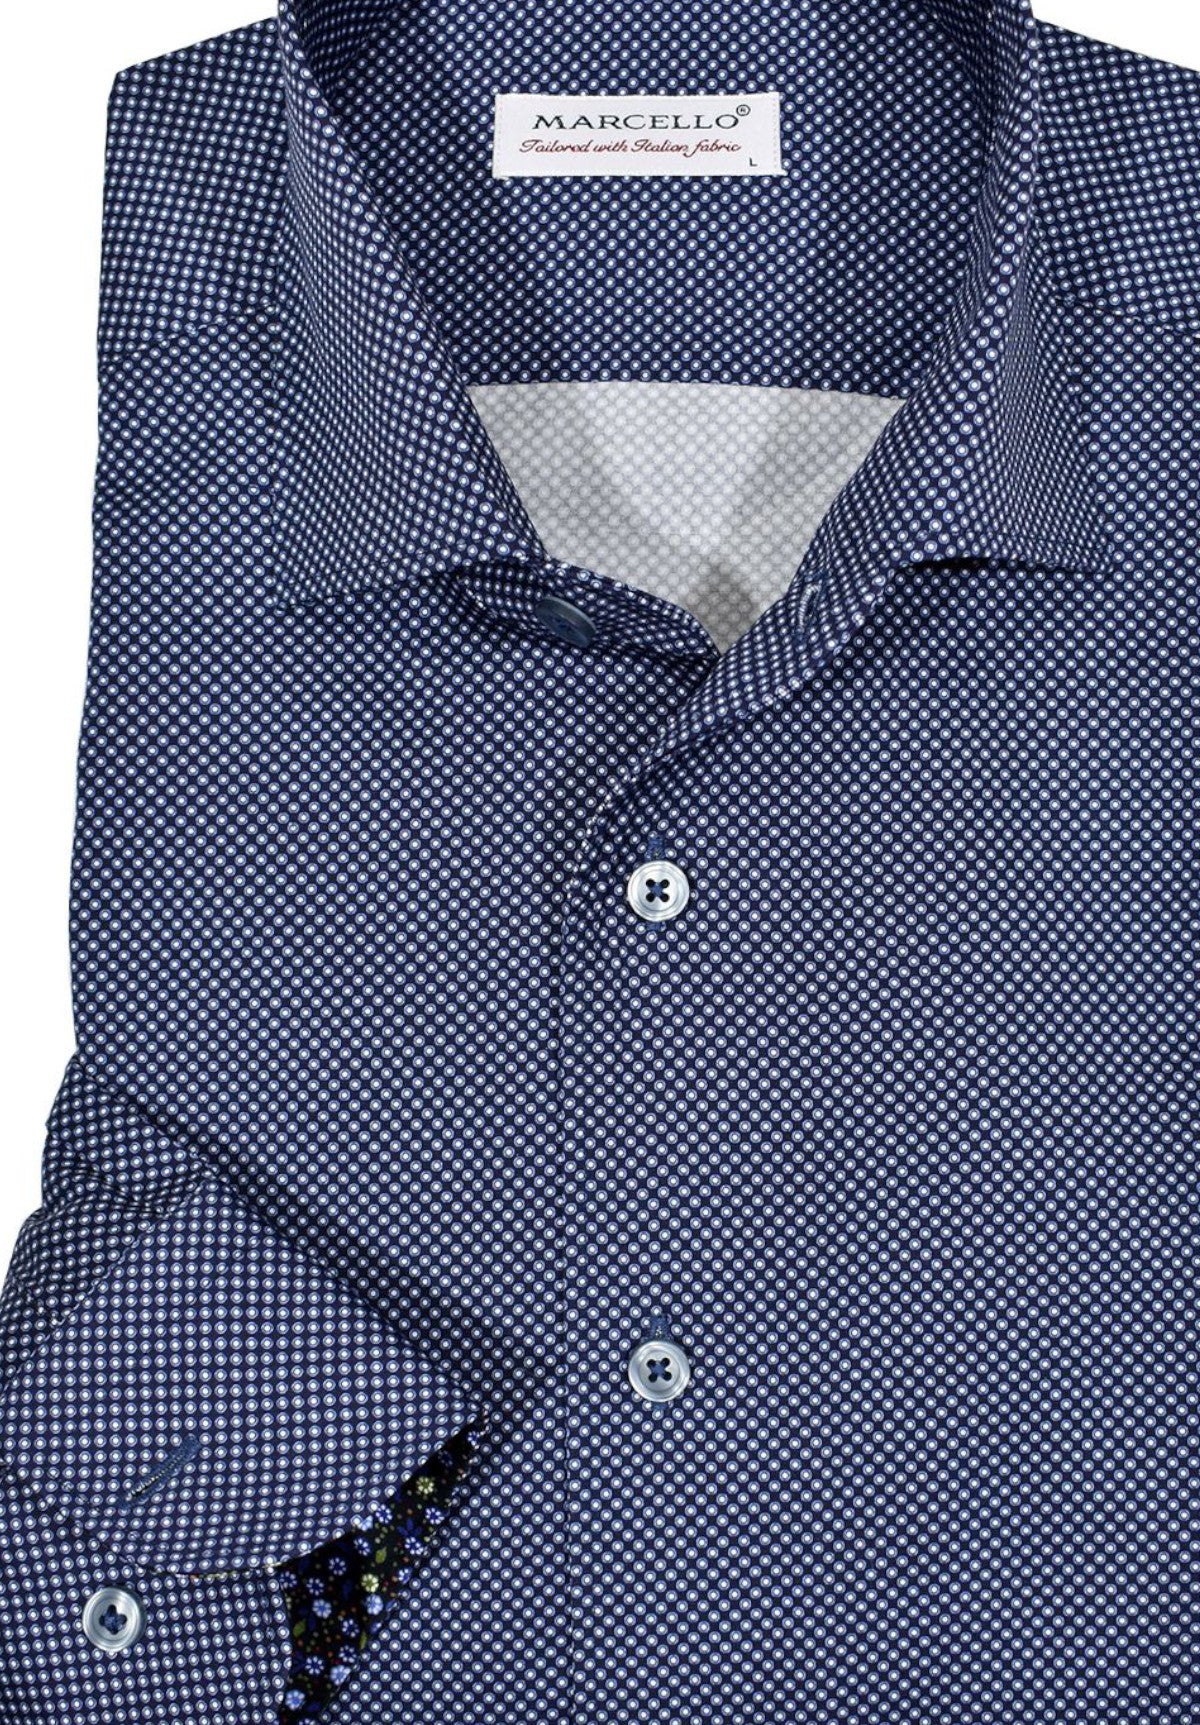 Exclusive Marcello 1 Piece Roll Collar Shirt.  **SLIM FIT**  The one piece roll collar stands perfectly and looks fantastic alone or under a sport coat.  The classic navy with sky dot pattern coupled with a rich, elegant fabric creates a sophisticated look to set your apart from the rest.  Hand selected buttons, two button cuff placket for the best look when rolling up the cuffs and enhanced stitch detailing.    Slim to modern fit best for a slim to medium build.